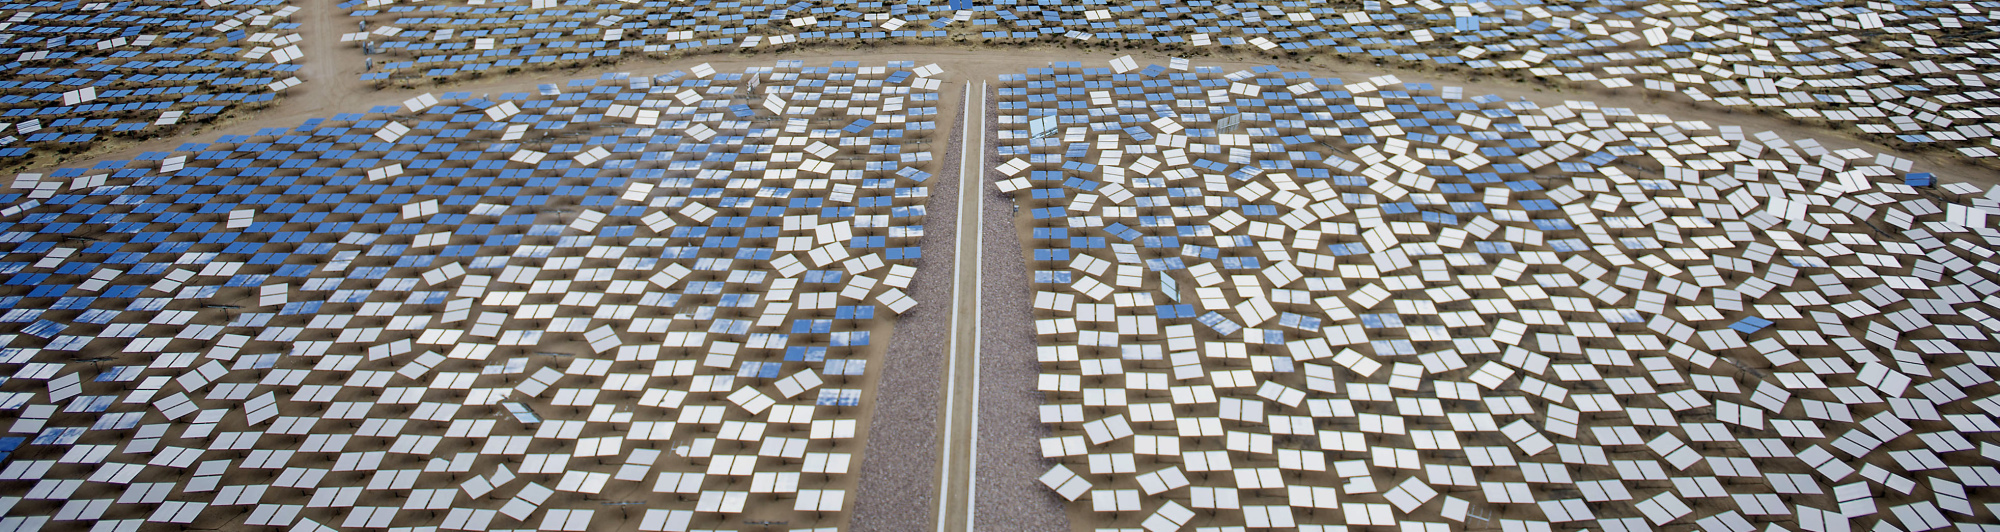 Operations At The Ivanpah Solar Electric Generating System